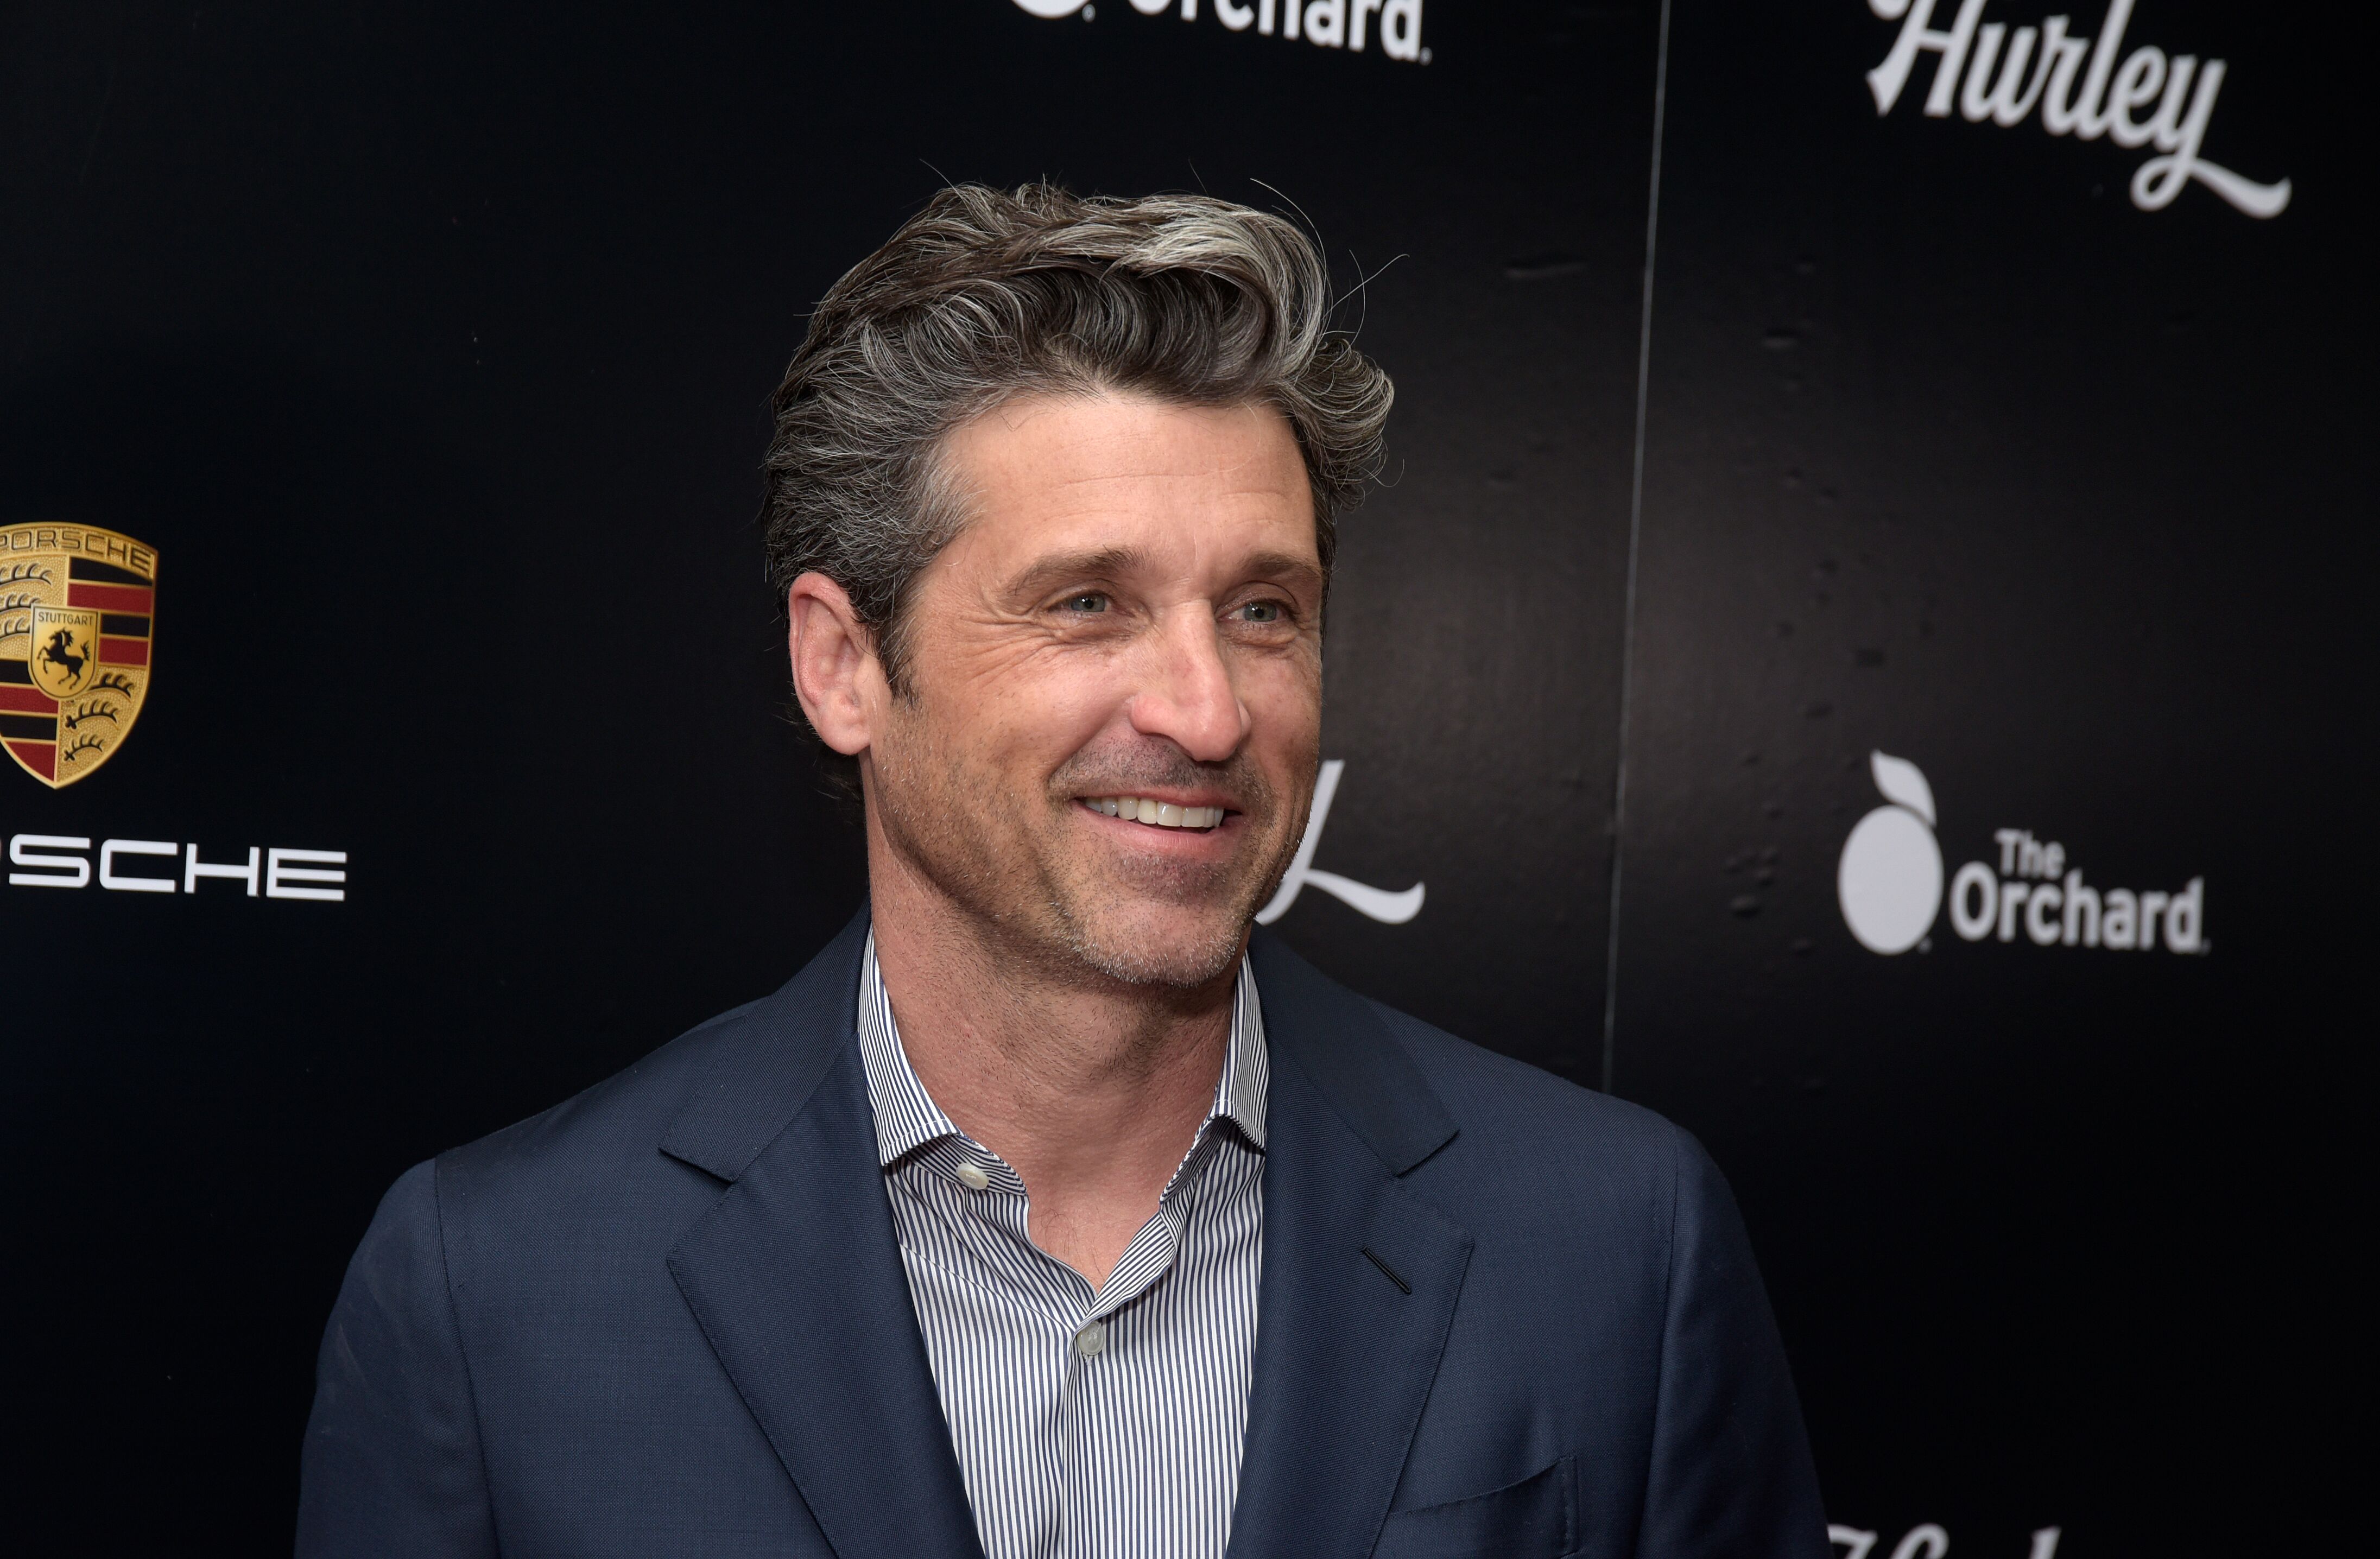  Patrick Dempsey attends the Los Angeles premiere of "Hurley" on March 18, 2019 in Los Angeles, California. | Photo: Getty Images